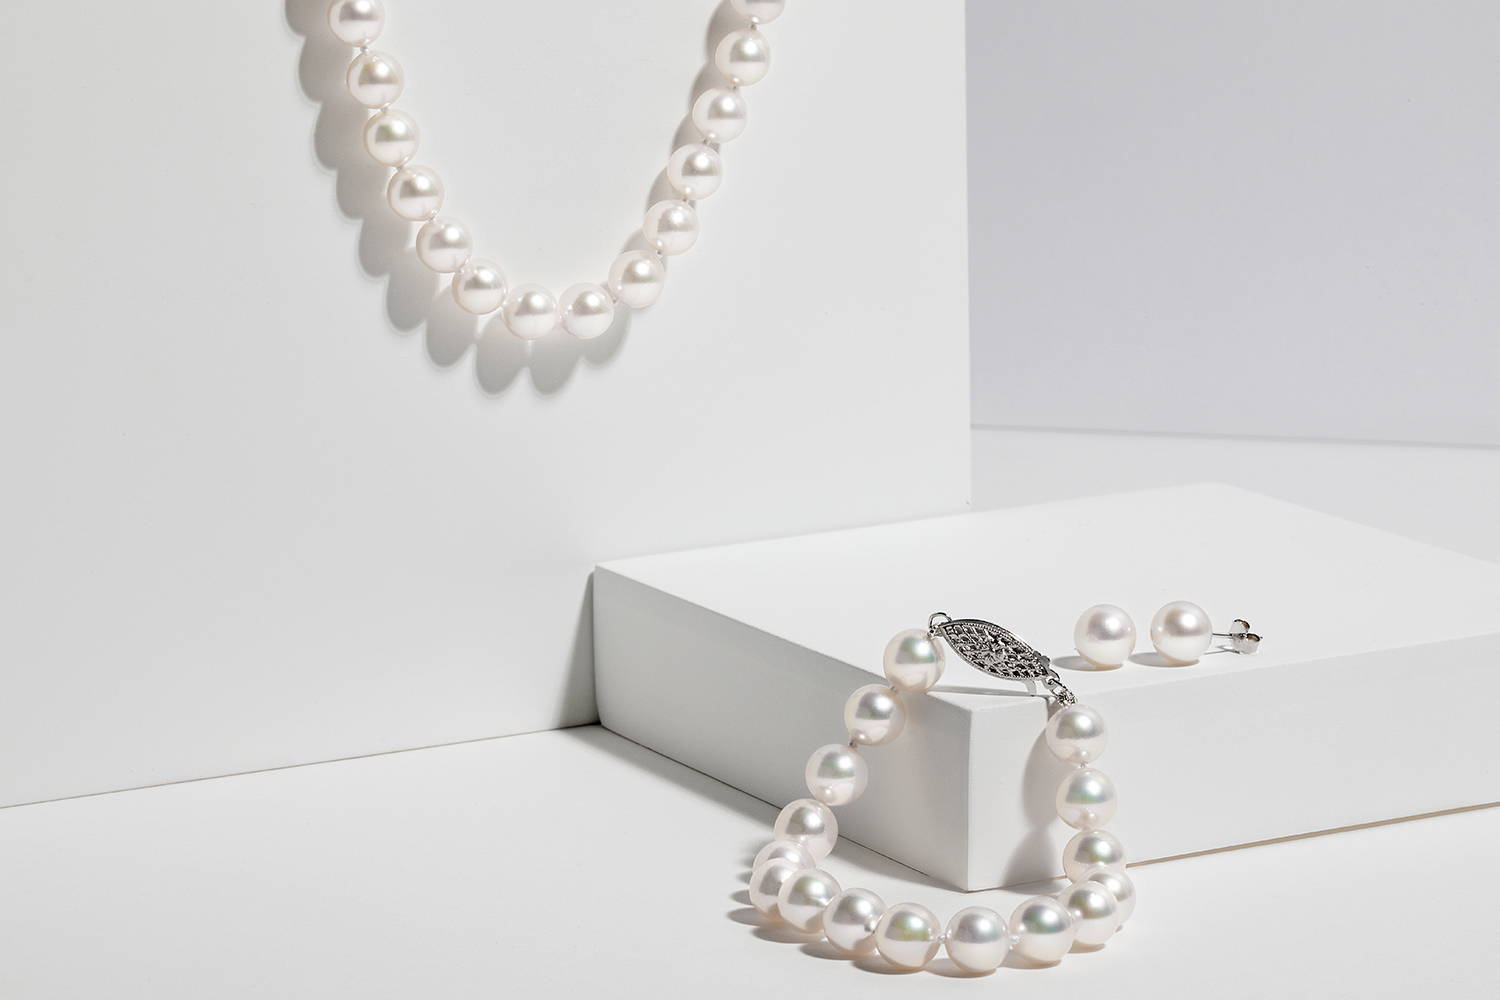 White pearl necklace and bracelet draped against white and grey modern background blocks